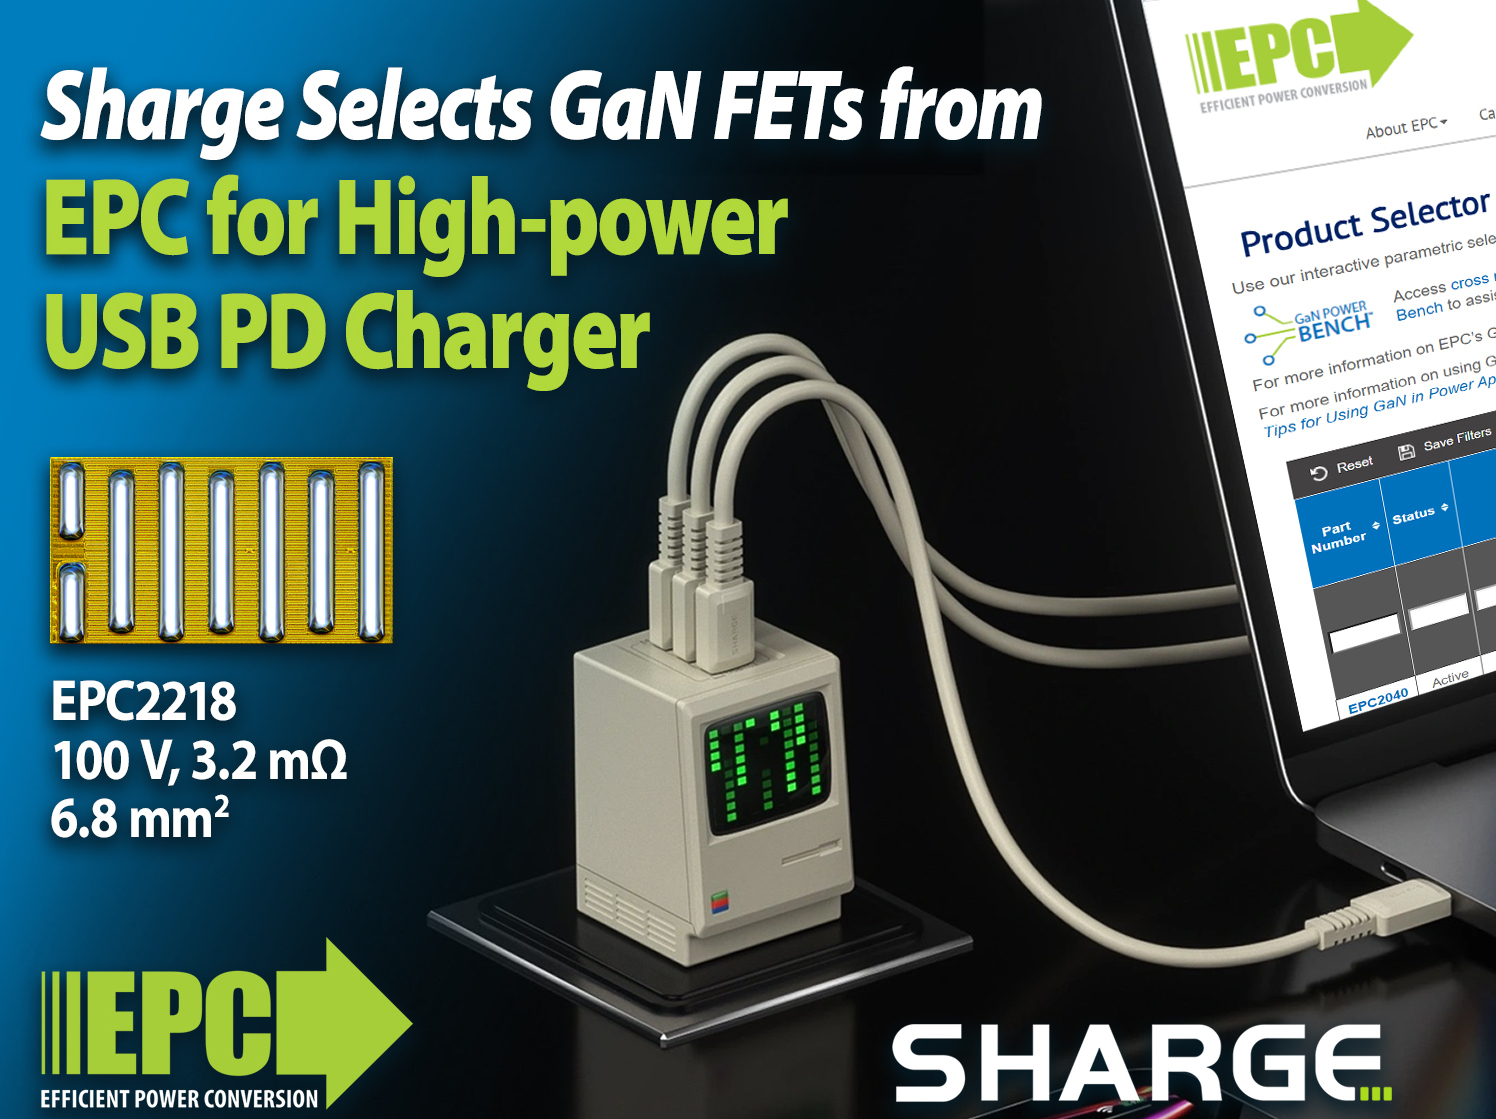 Sharge Selects GaN FETs from EPC for High-power USB PD Charger